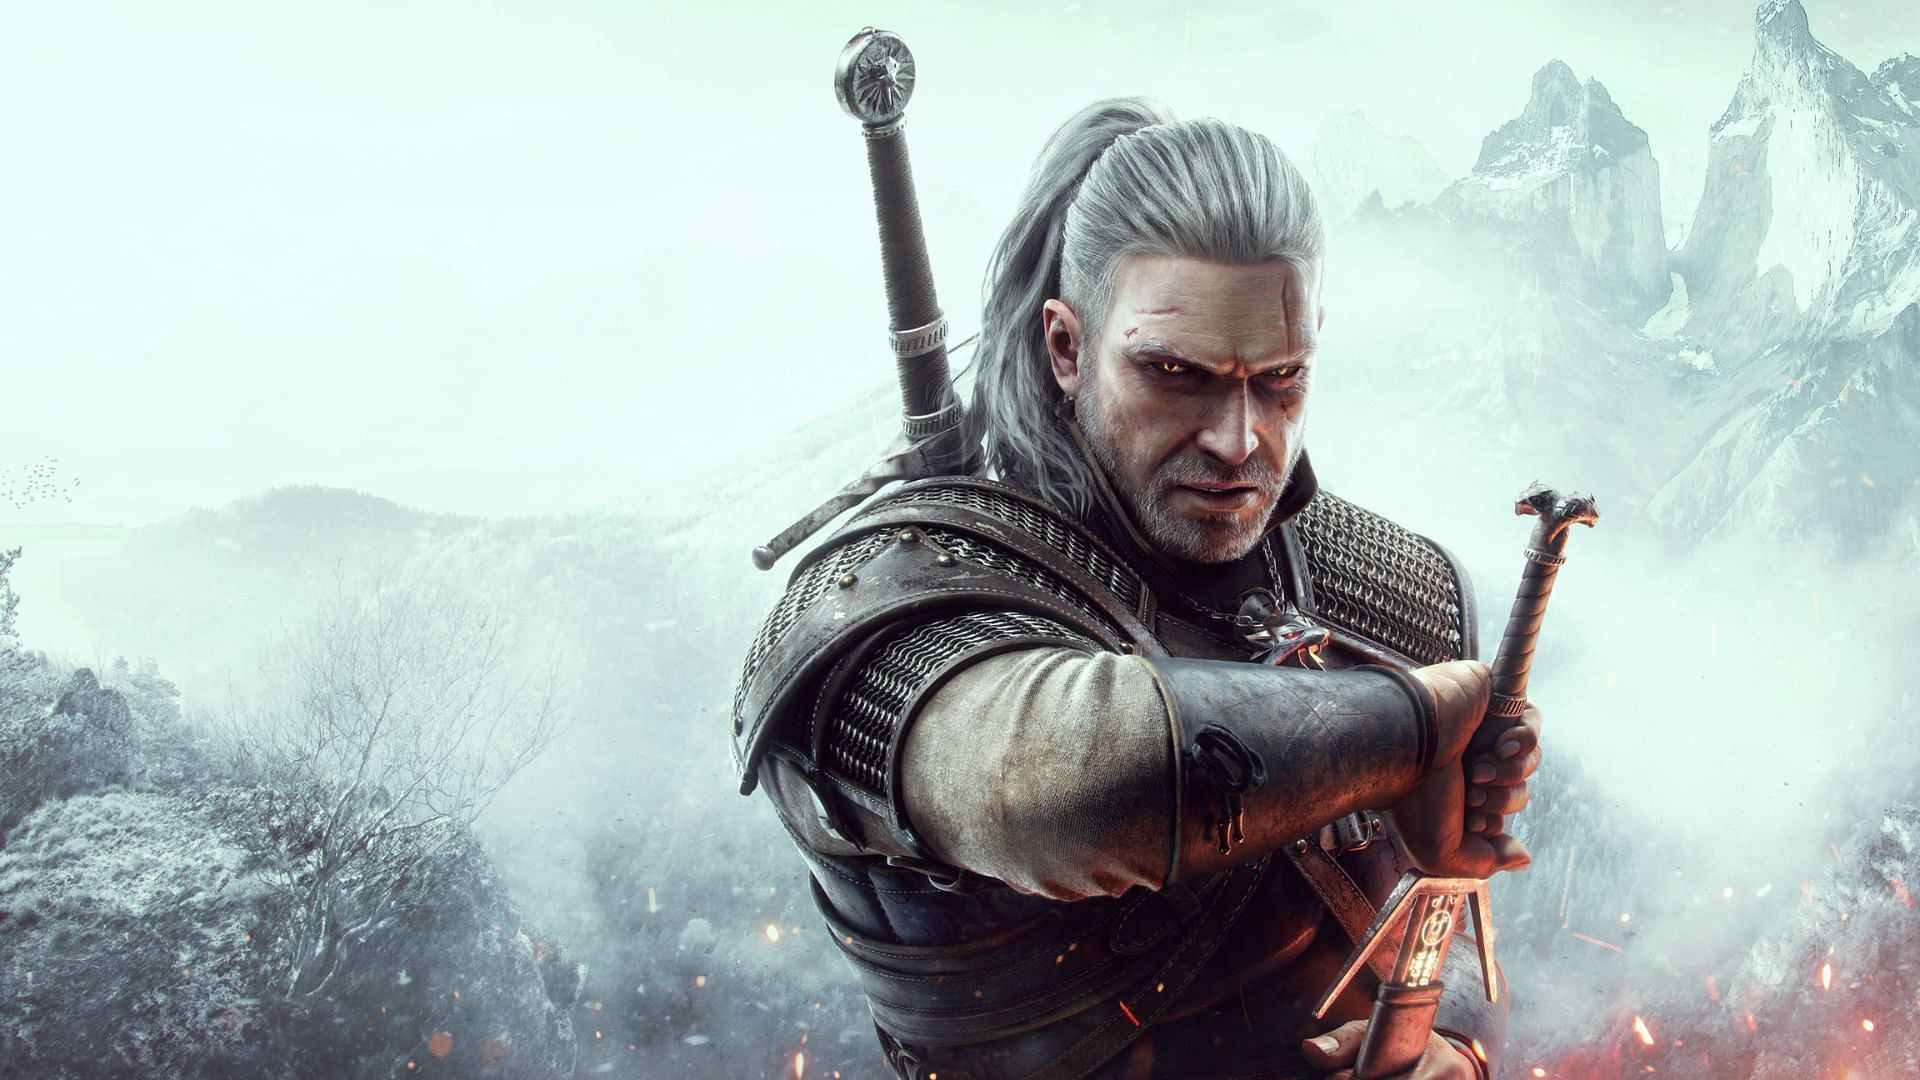 Witcher from The Witcher 3: Wild Hunt (Image via CD Projekt)